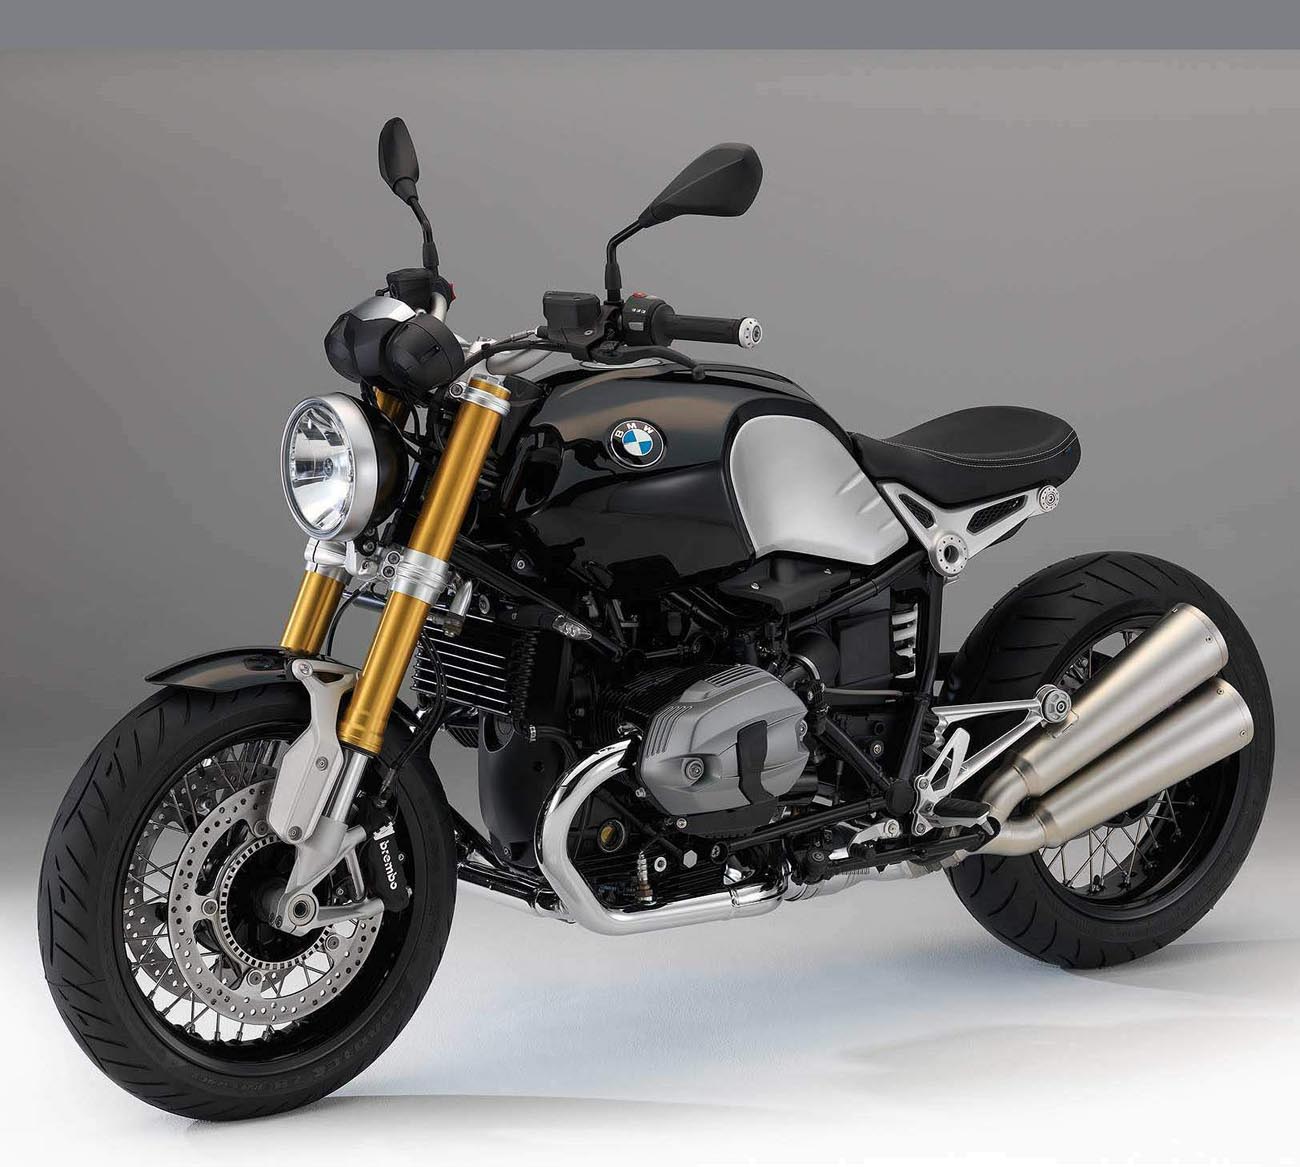 BMW R nineT technical specifications